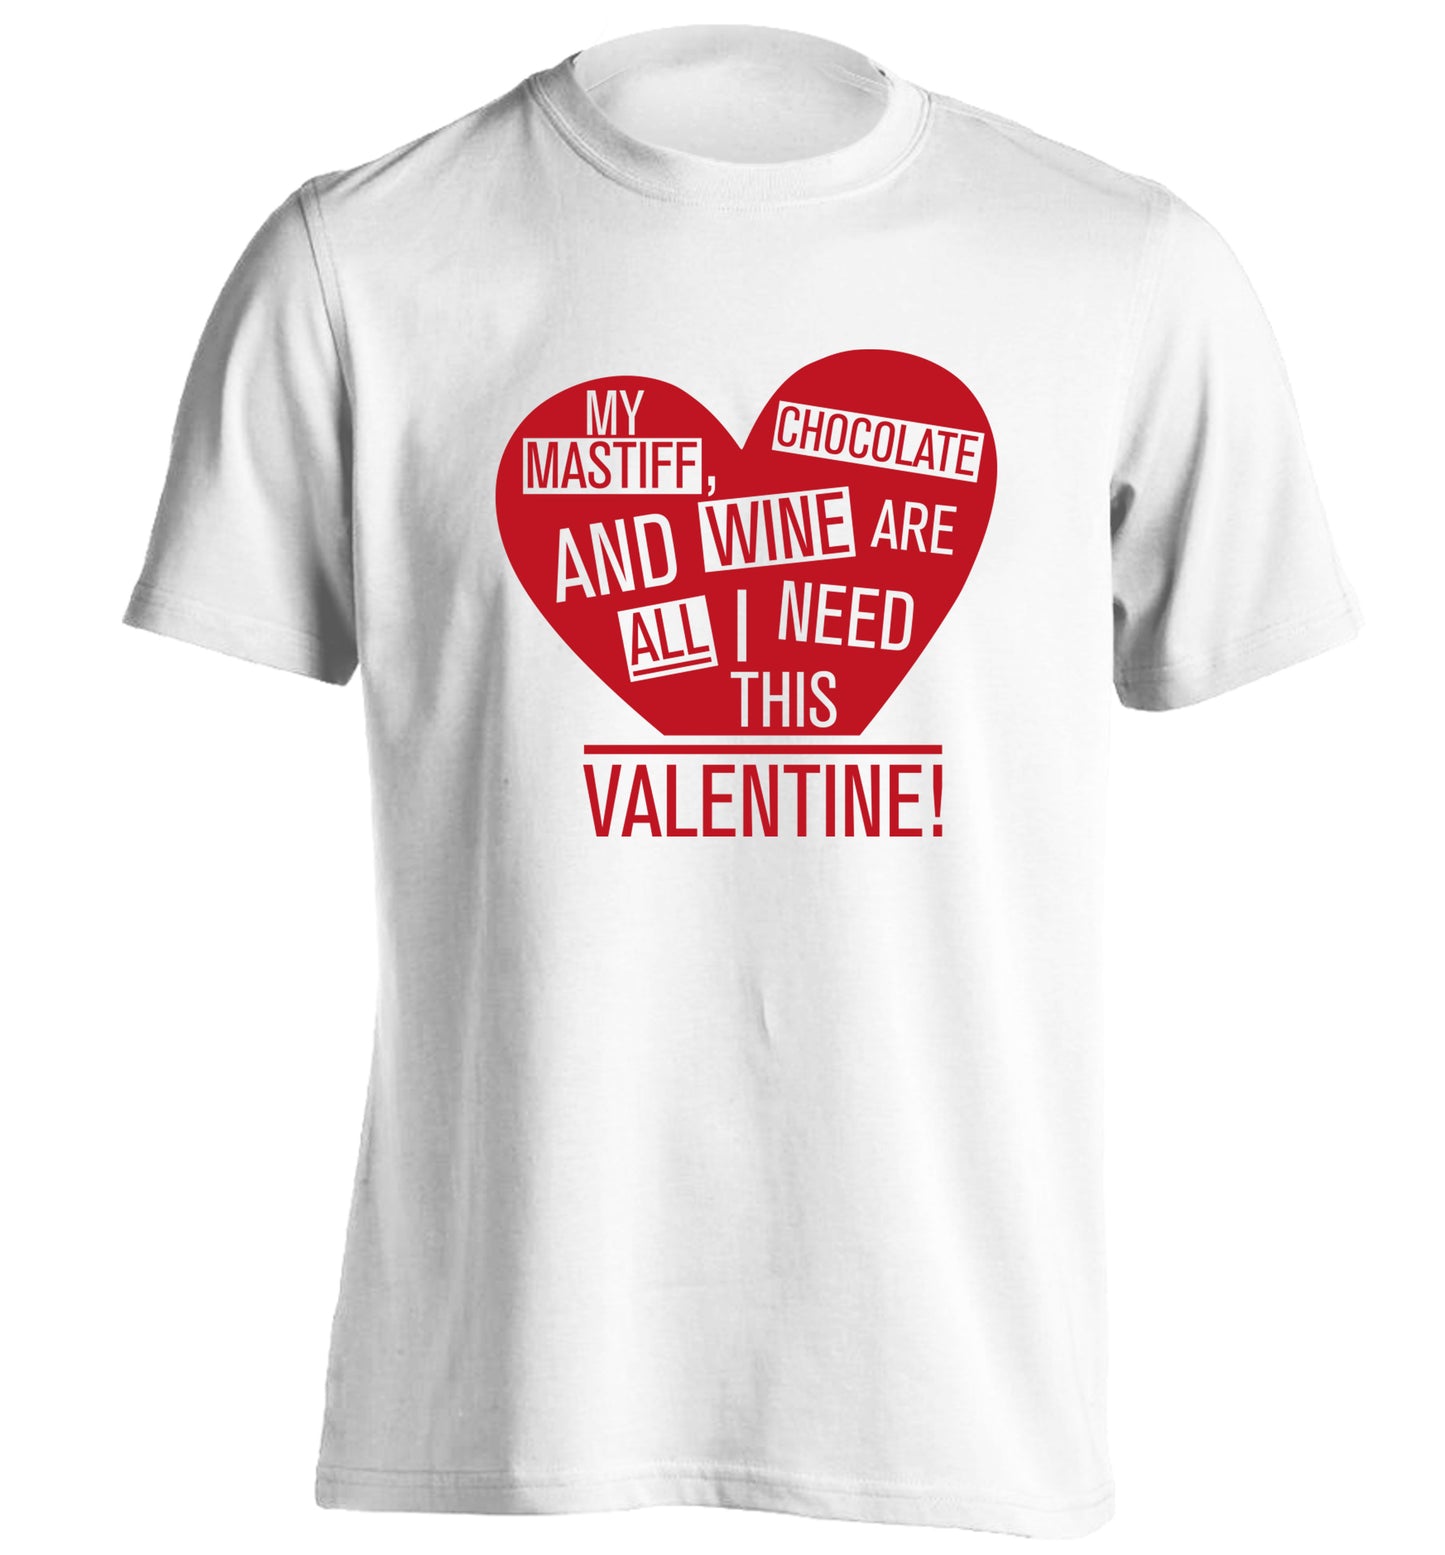 My mastiff, chocolate and wine are all I need this valentine! adults unisex white Tshirt 2XL